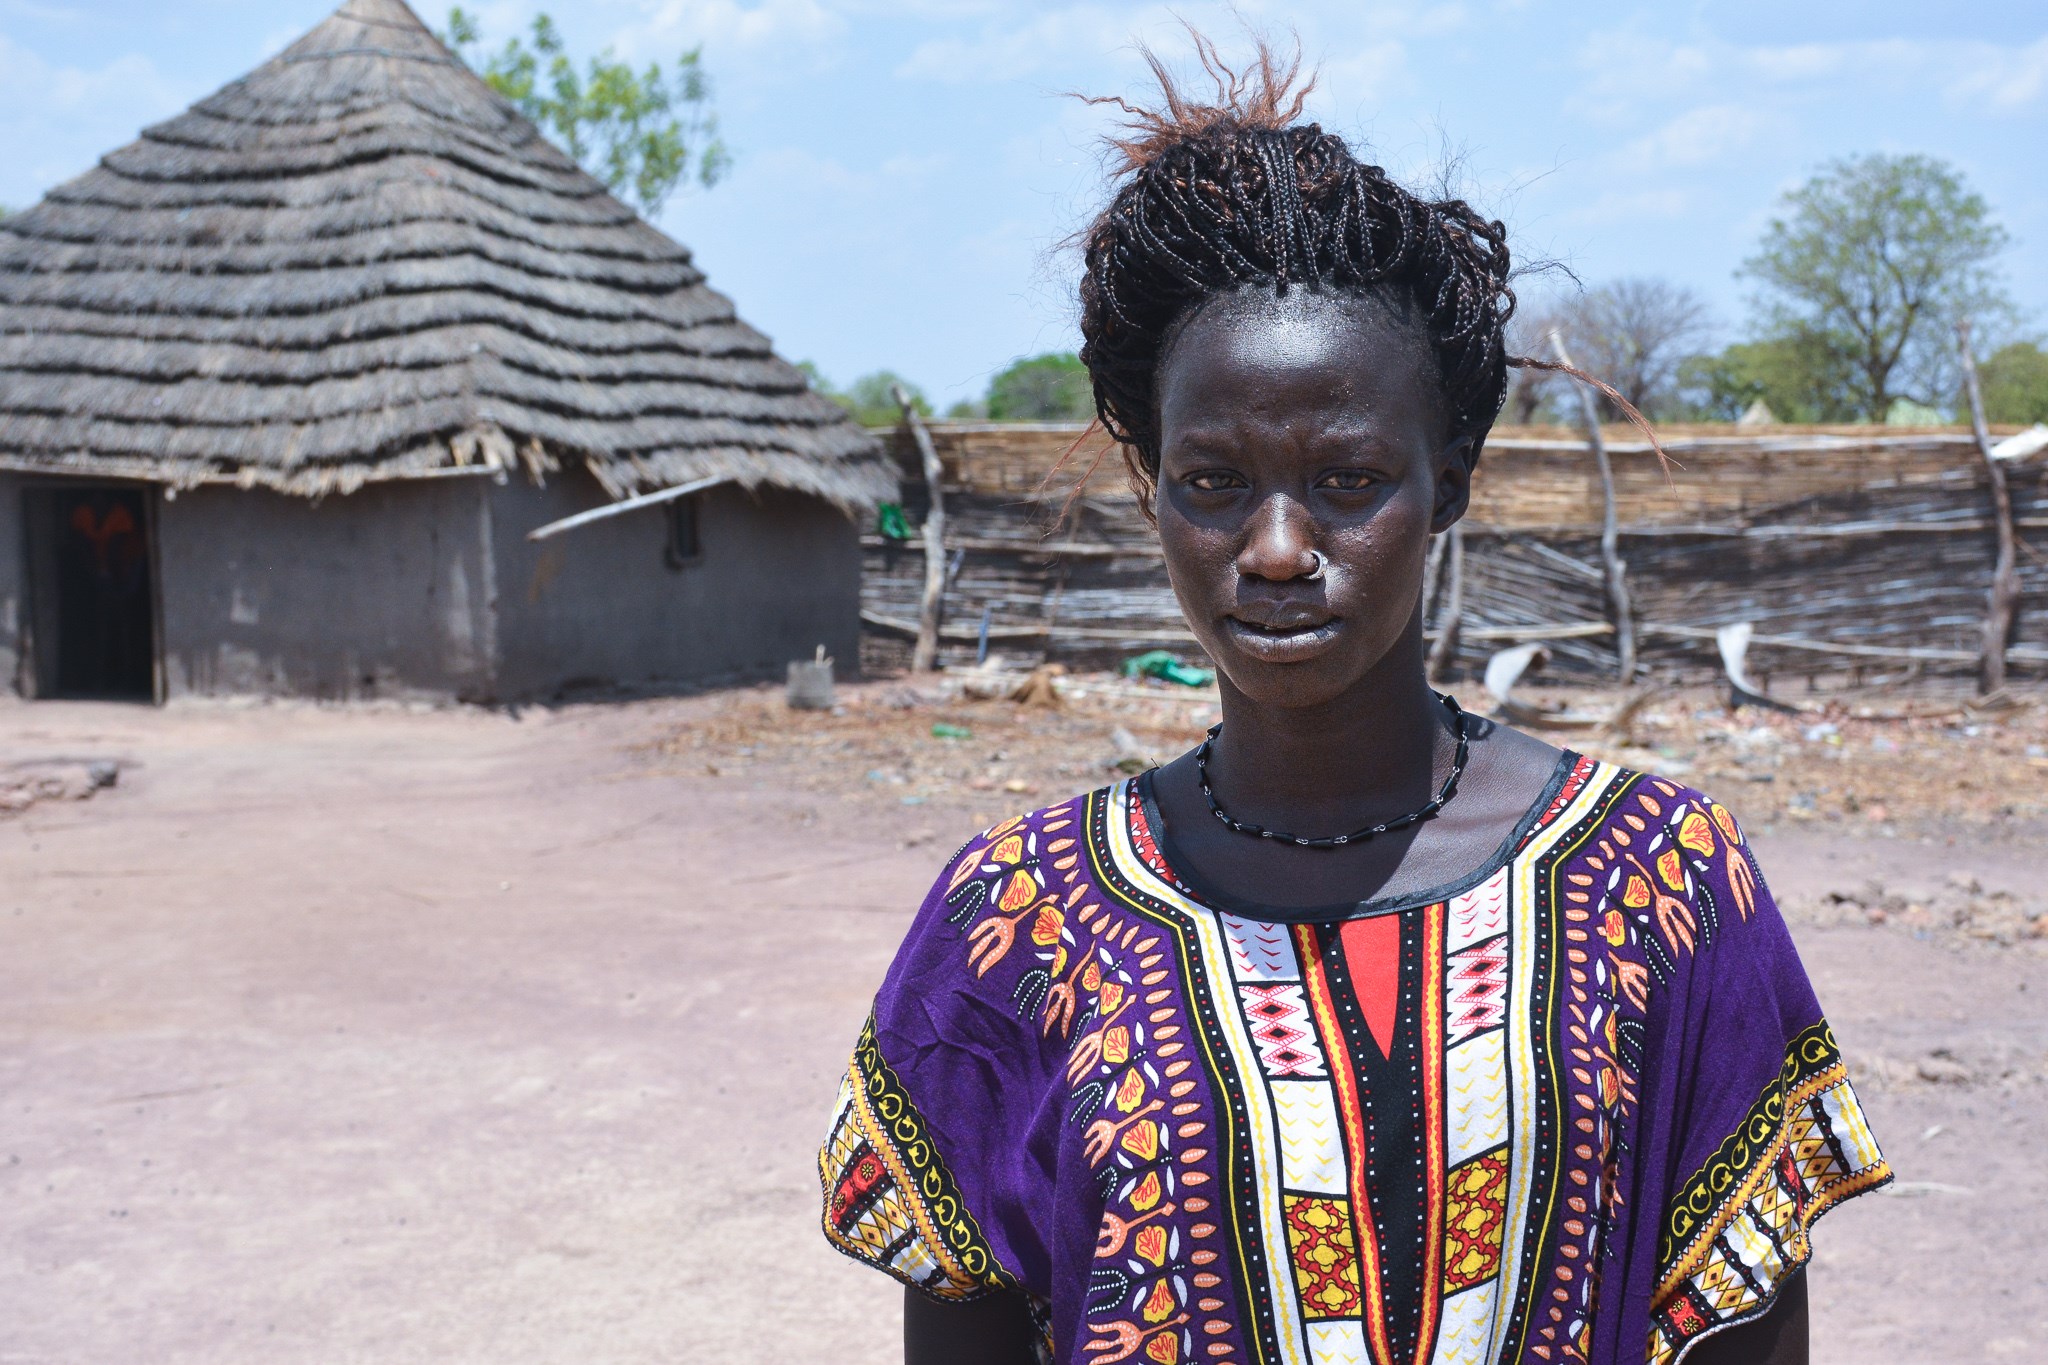 Hunger, Covid and traditional practices force girls like Bakita in South Sudan to early marriage